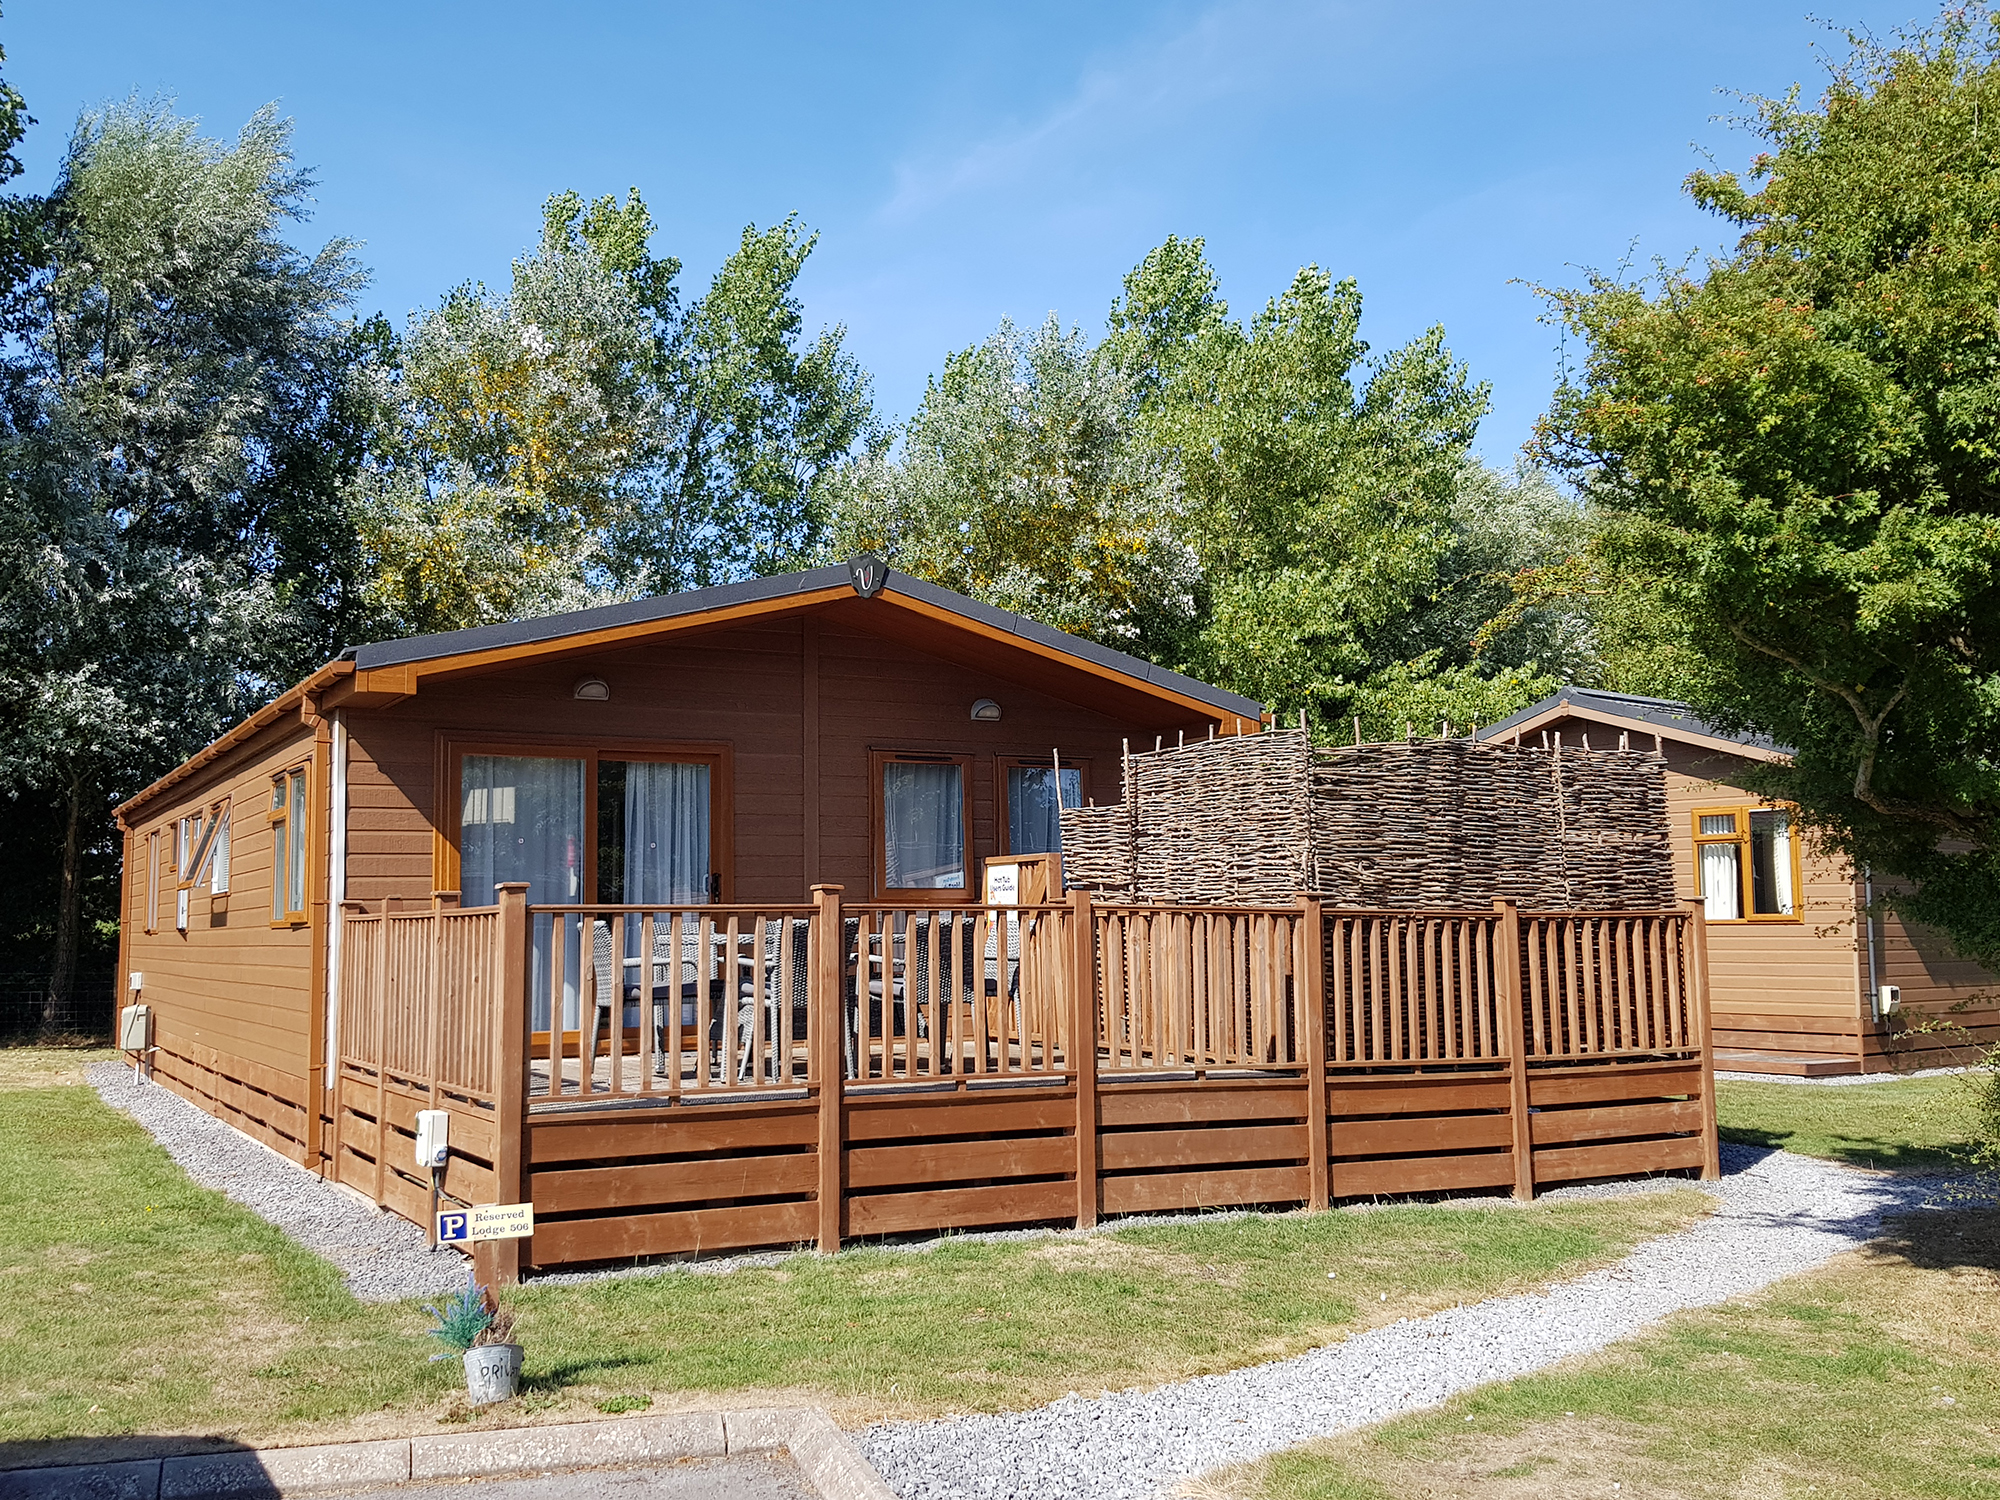 Dog friendly lodges with hot tubs uk